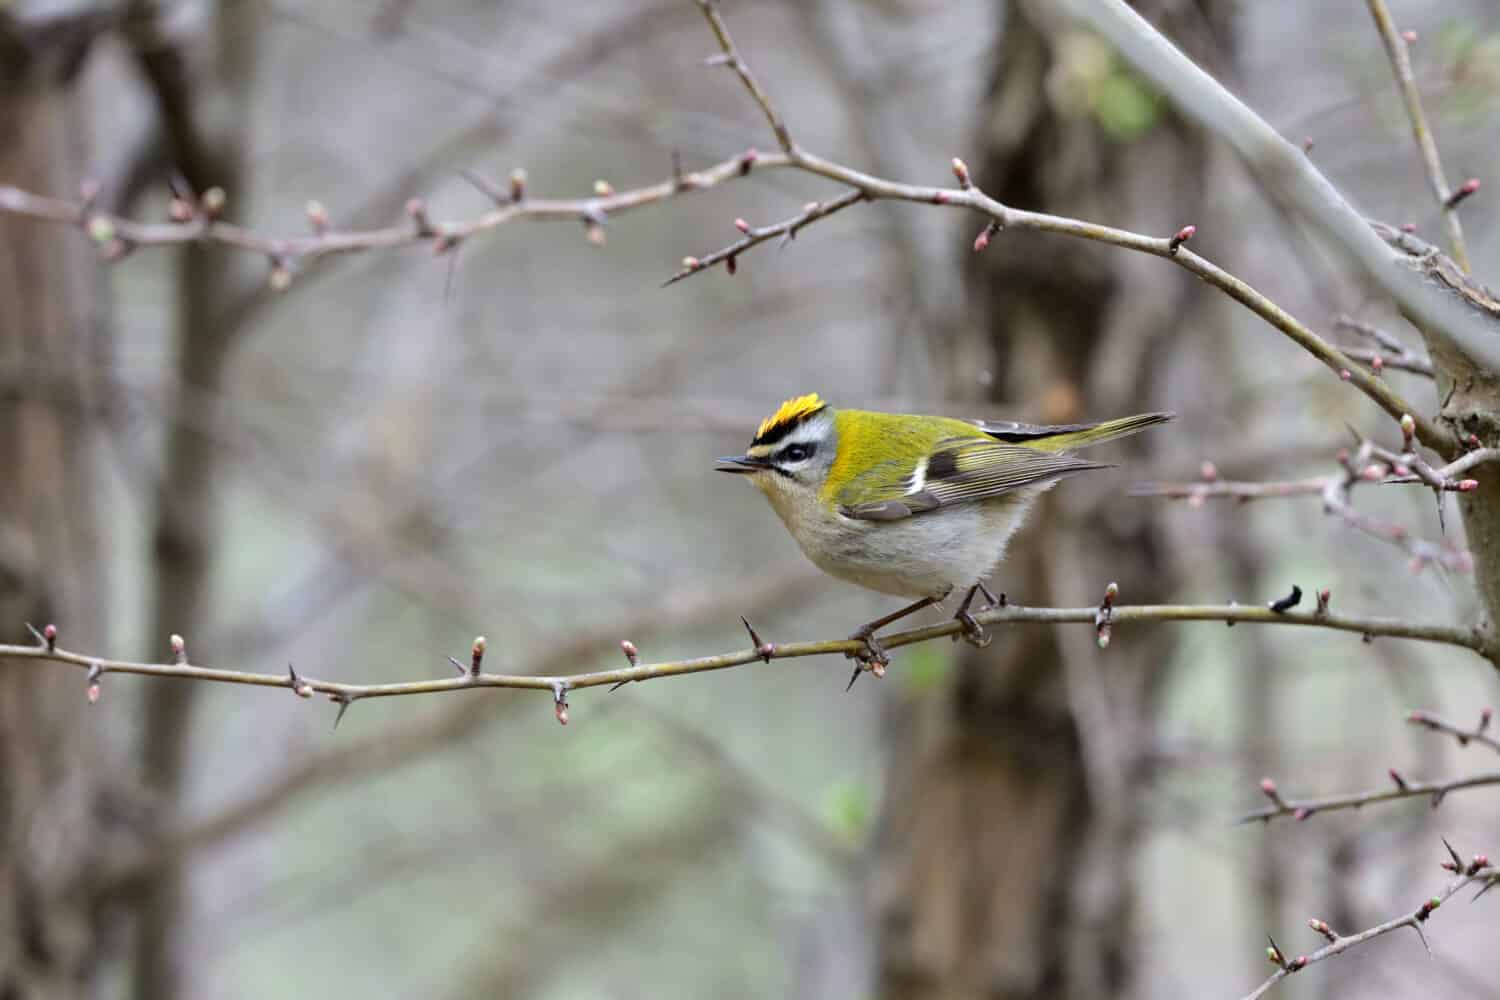 A beautiful small female Common firecrest (Regulus ignicapilla) which is the smallest Italian bird weighing 5 - 7 grams, photographed in the woods of the Ligurian Apennines.